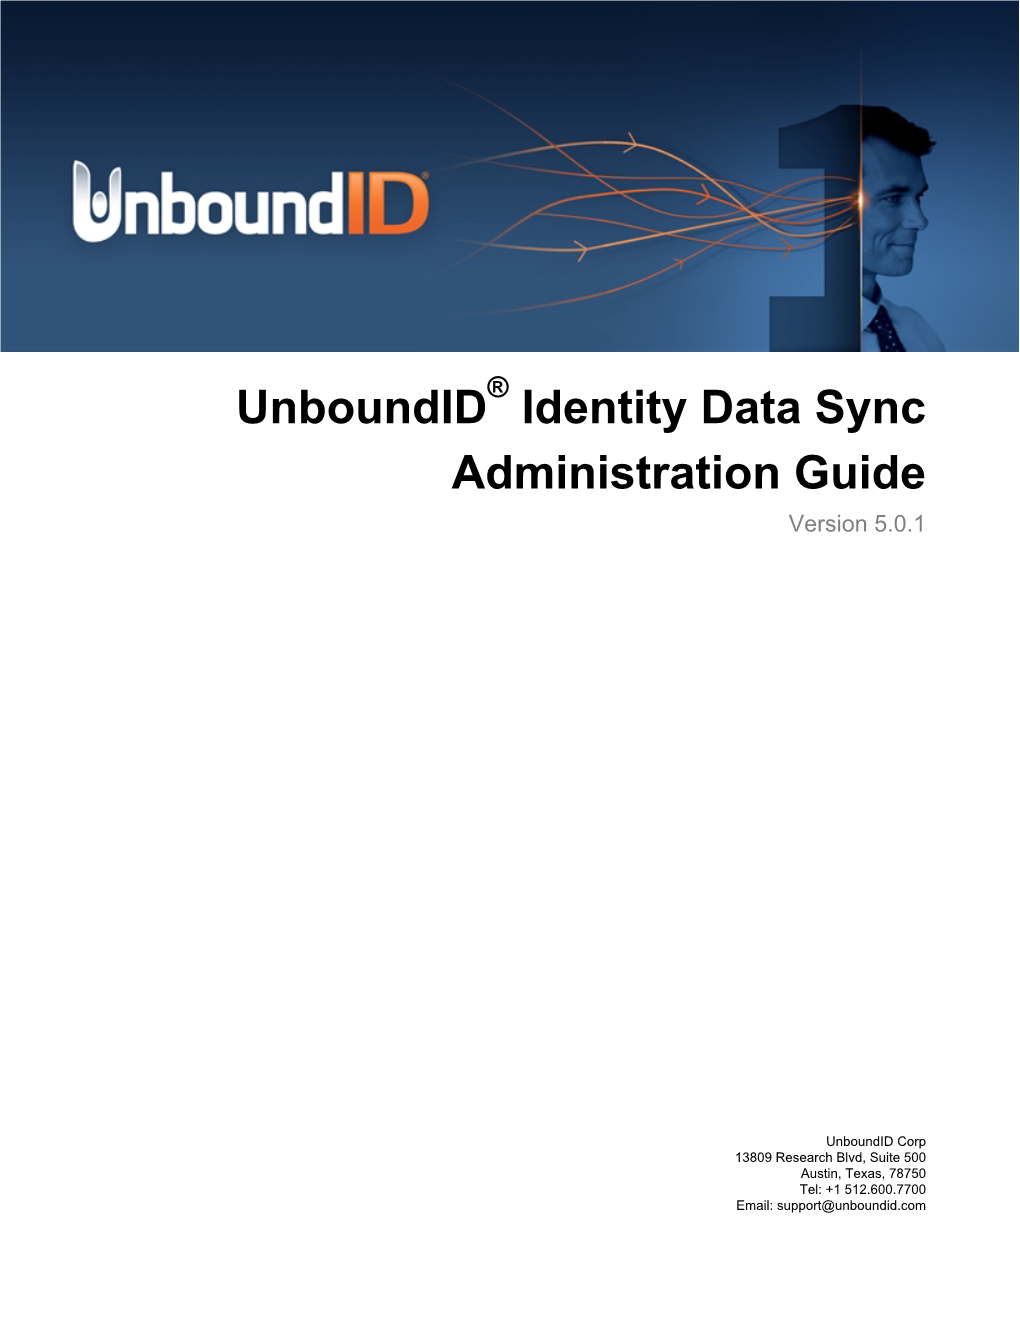 Unboundid Identity Data Sync Administration Guide